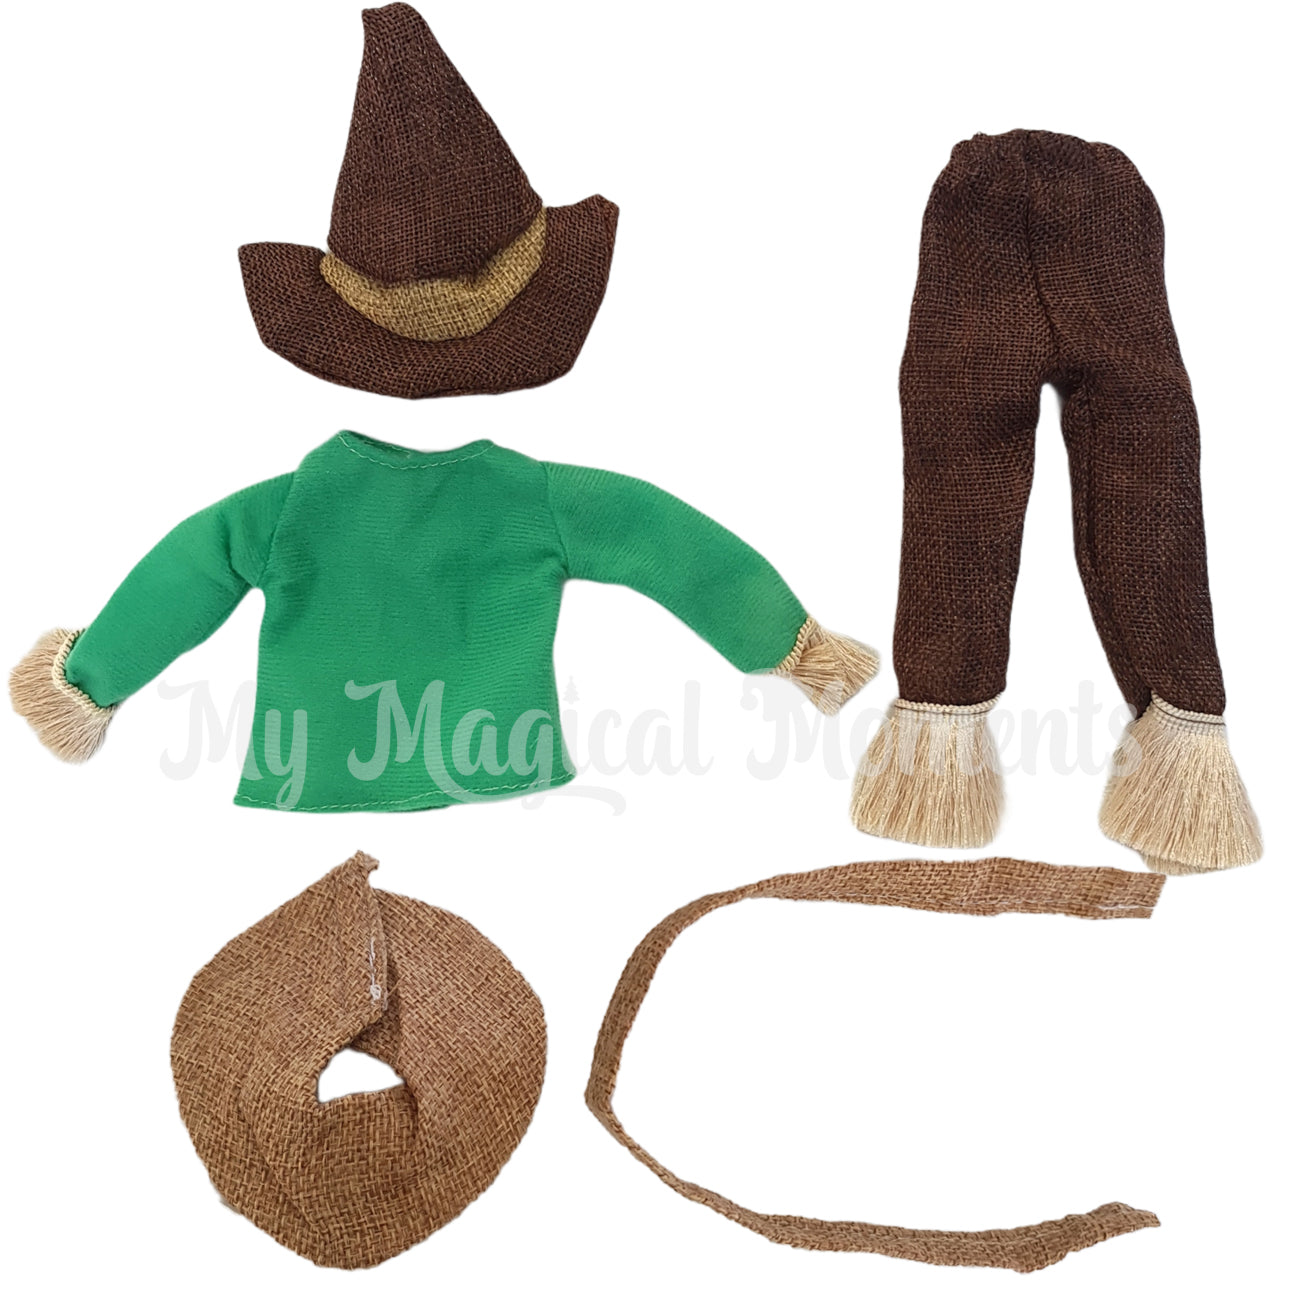 elf scarecrow outfit with straw hat, top, pants